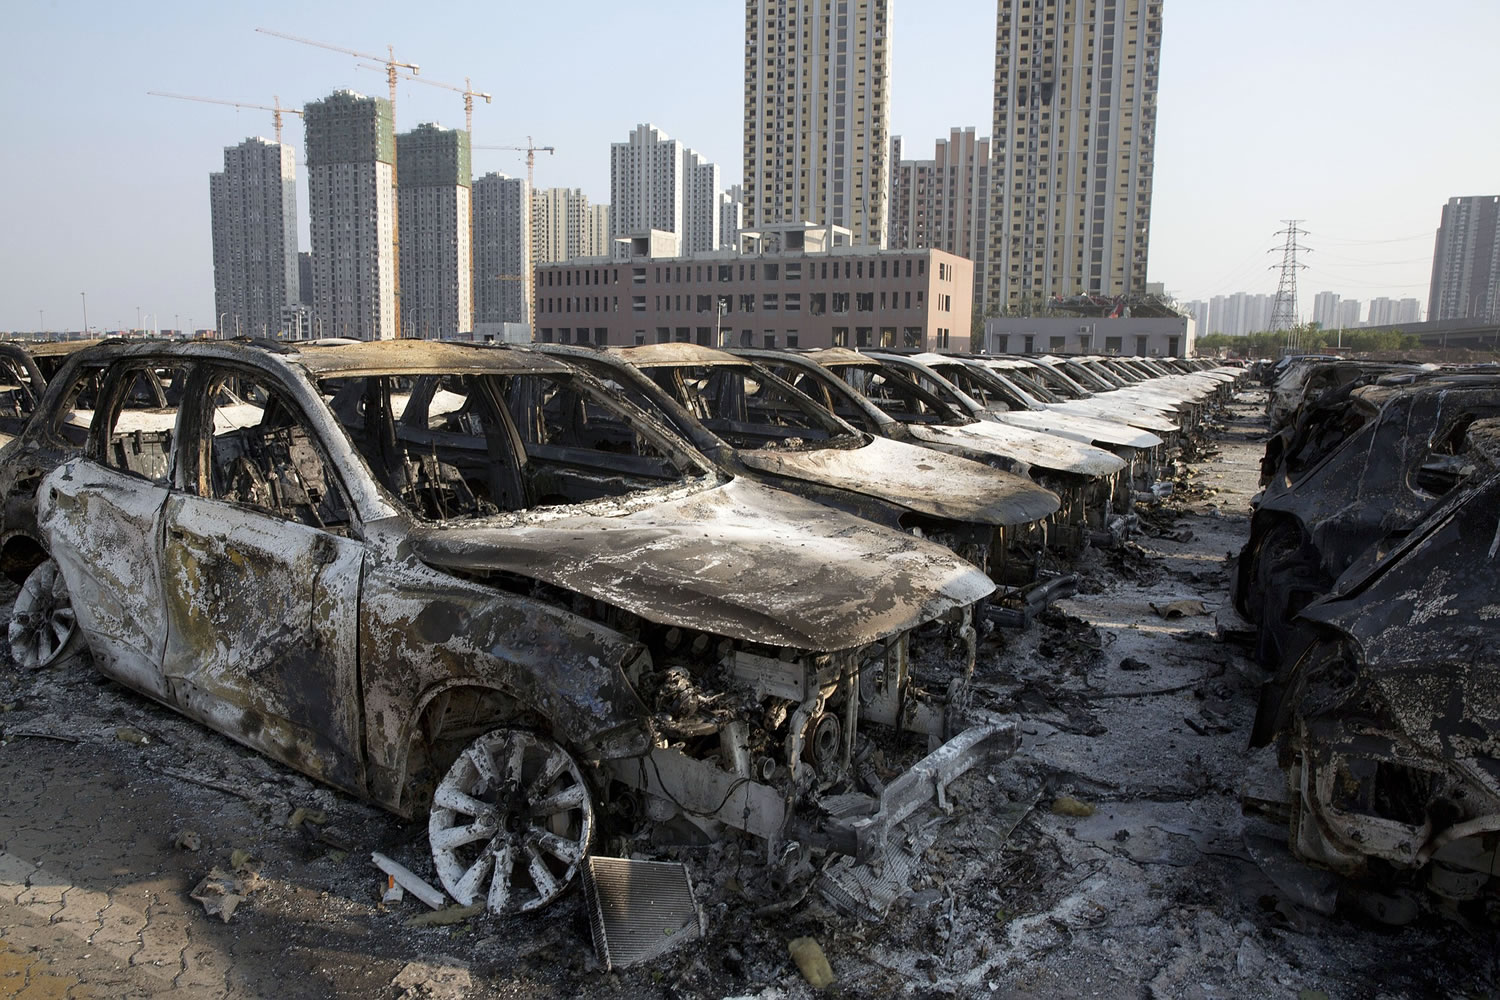 Charred remains of new cars are photographed after an explosion tore through the parking lot of a warehouse in northeastern China's Tianjin municipality, Thursday, Aug. 13, 2015.  Huge explosions in the warehouse district sent up massive fireballs that turned the night sky into day in the Chinese port city of Tianjin, officials and witnesses said Thursday.